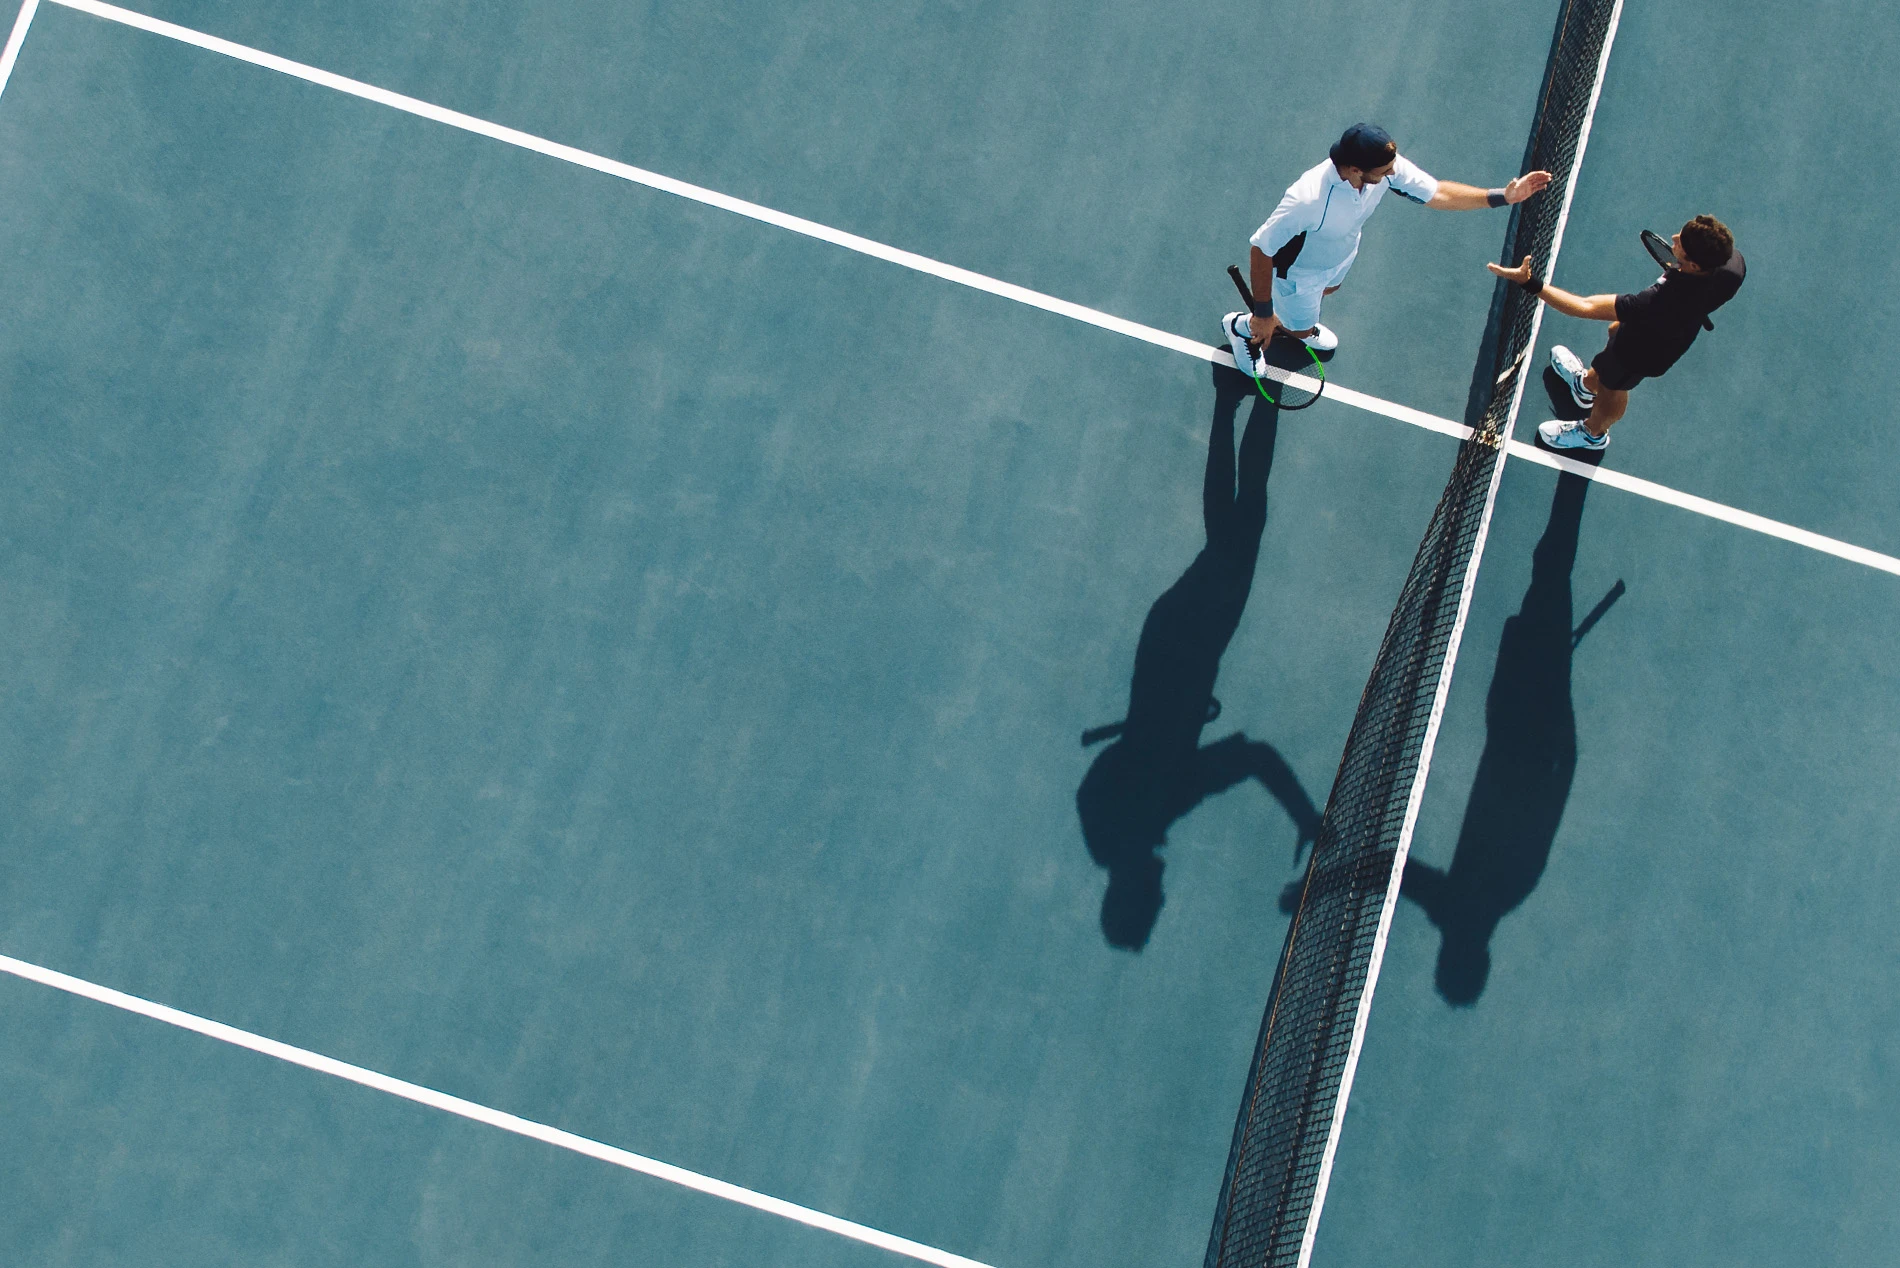 An online tennis booking system That Gives the Tennis Coaching Group A Fully Functional Online Solution